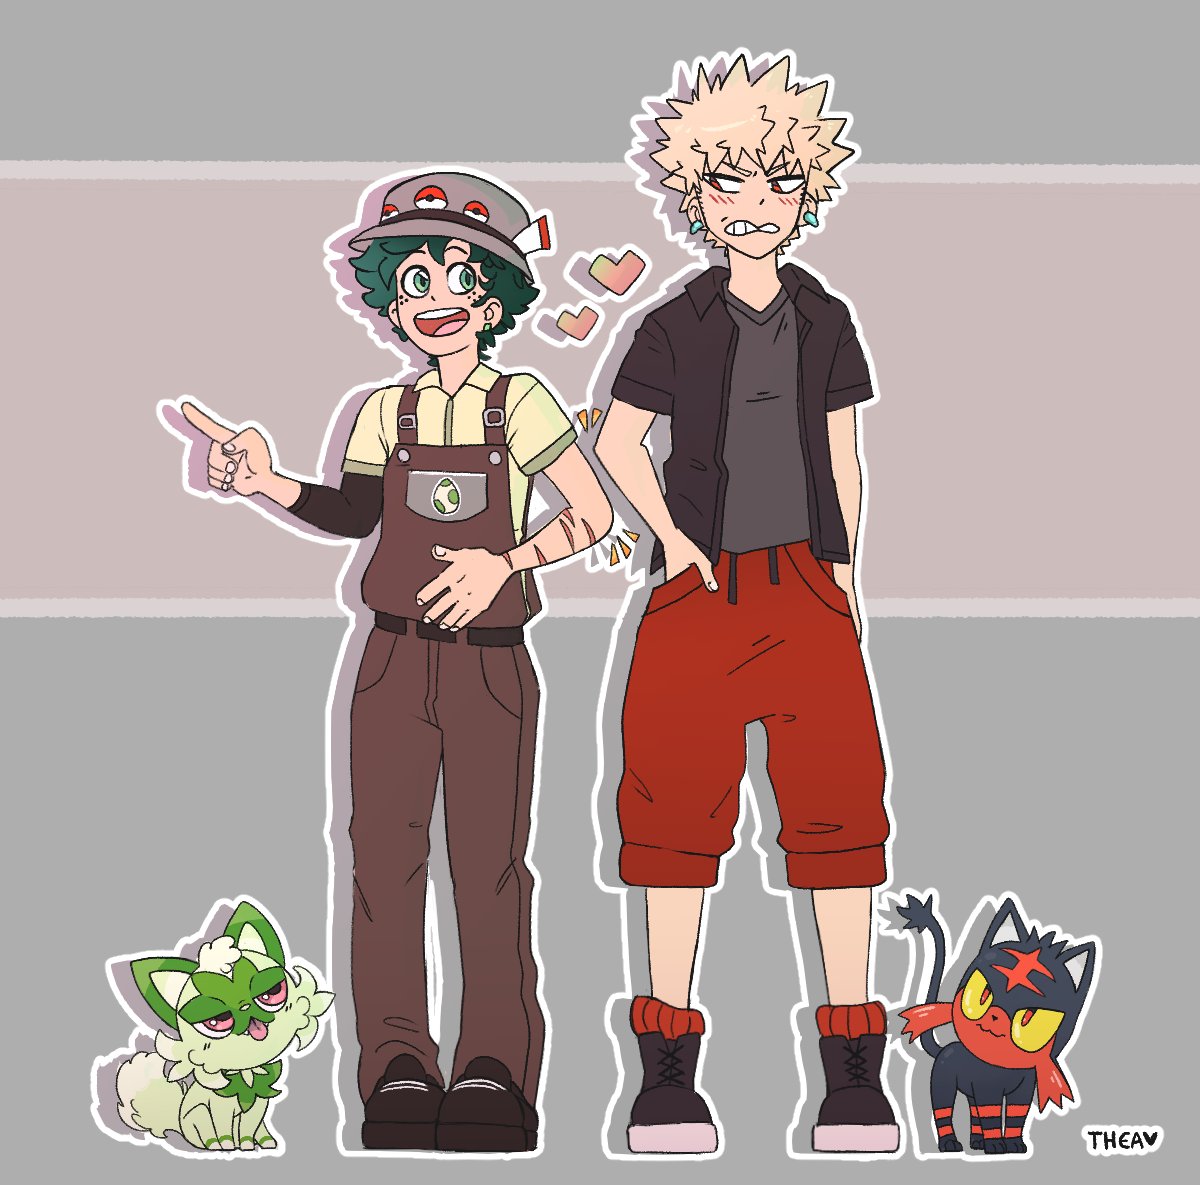 Made this a while ago but figured I'd upload it to get a lil traction on me twitter! Enjoy bkdk in pokemon-ish style!!!

#BKDK #BNHA #pokemon